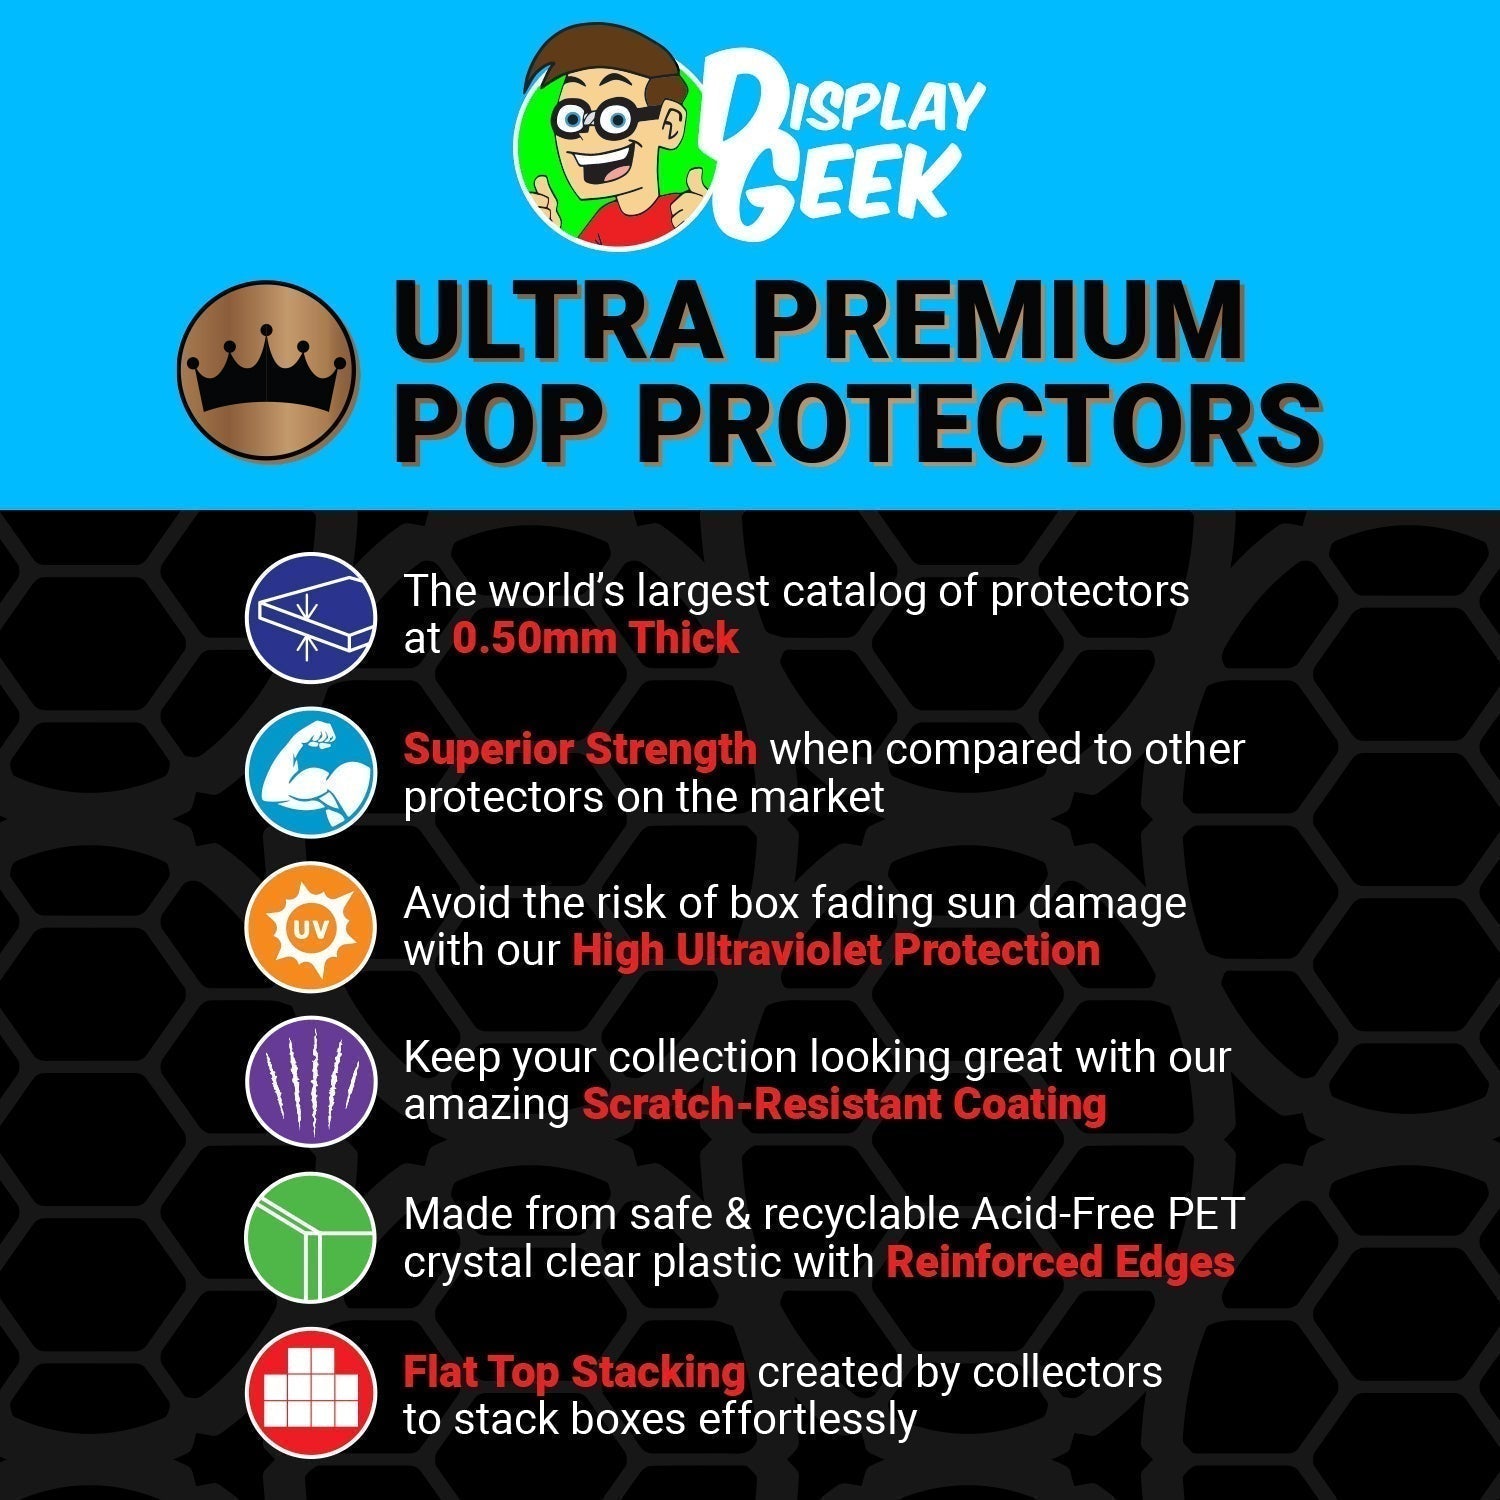 Pop Protector for Obi-Wan Kenobi in Delta 7 Starfighter #641 Funko Pop Rides - PPG Pop Protector Guide Search Created by Display Geek